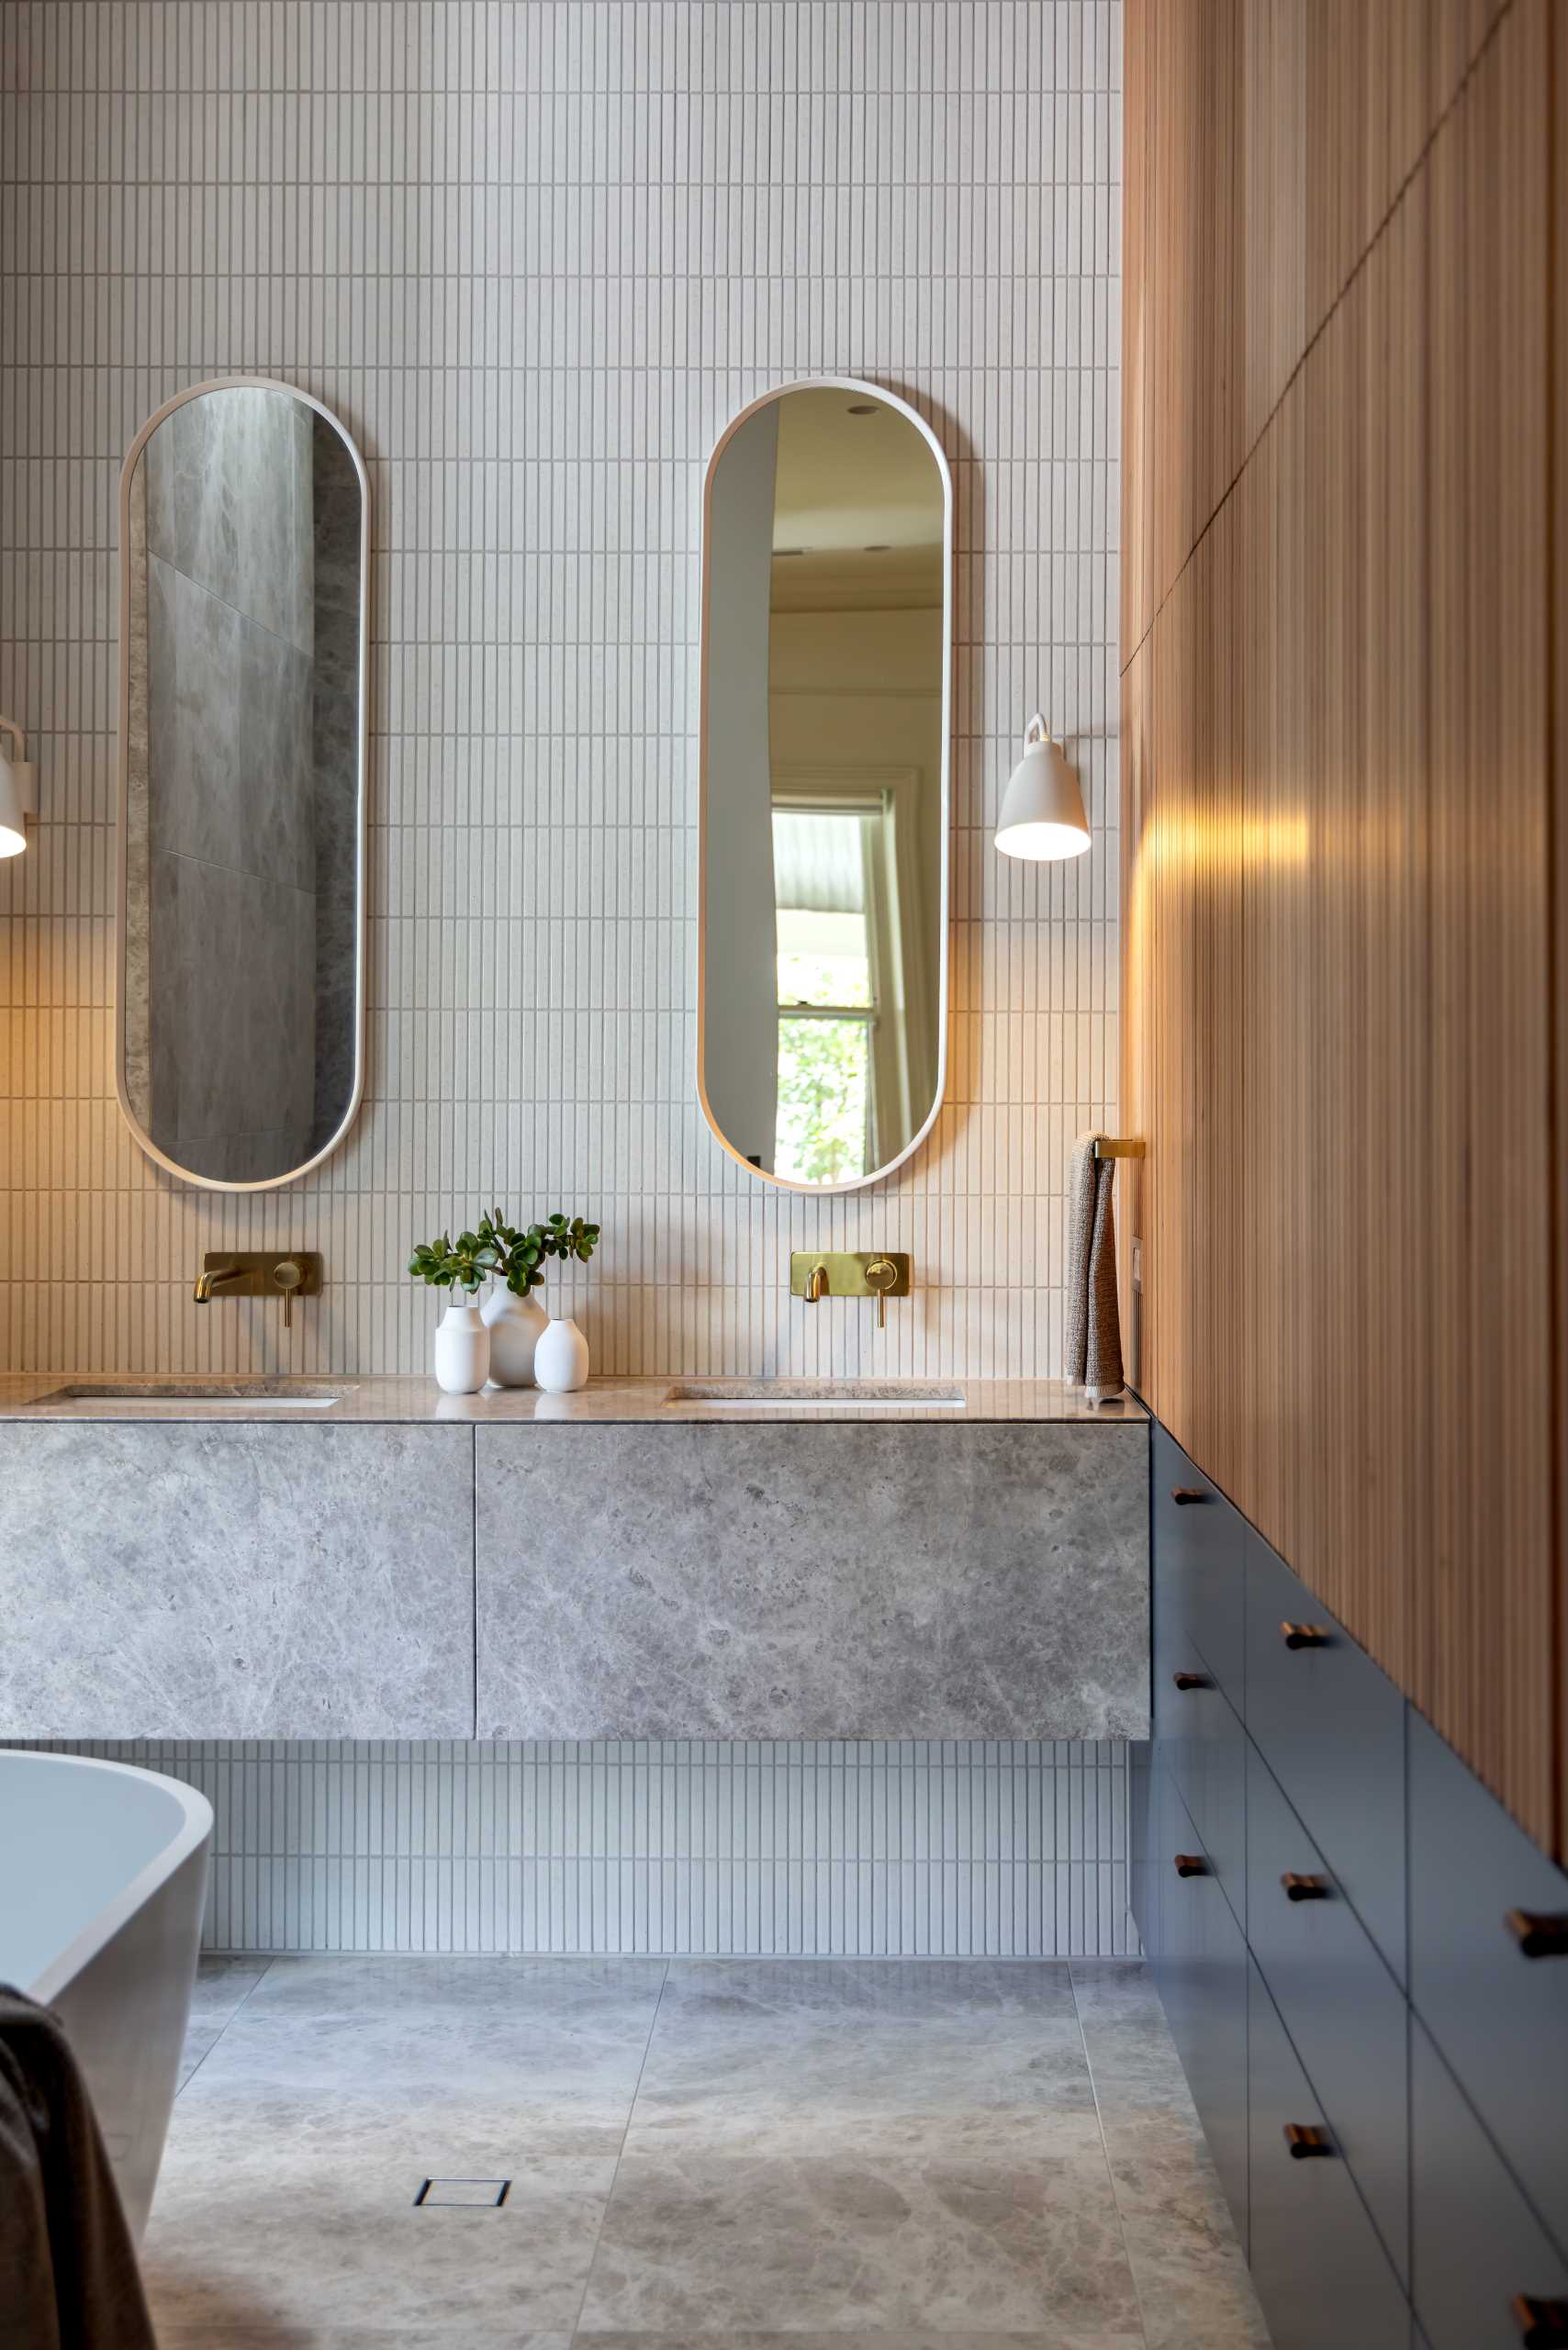 In an ensuite bathroom, tiles adorn the walls, while the bathtub is positioned underneath a skylight, a wall of wood slats adds a sense of warmth, with storage below.